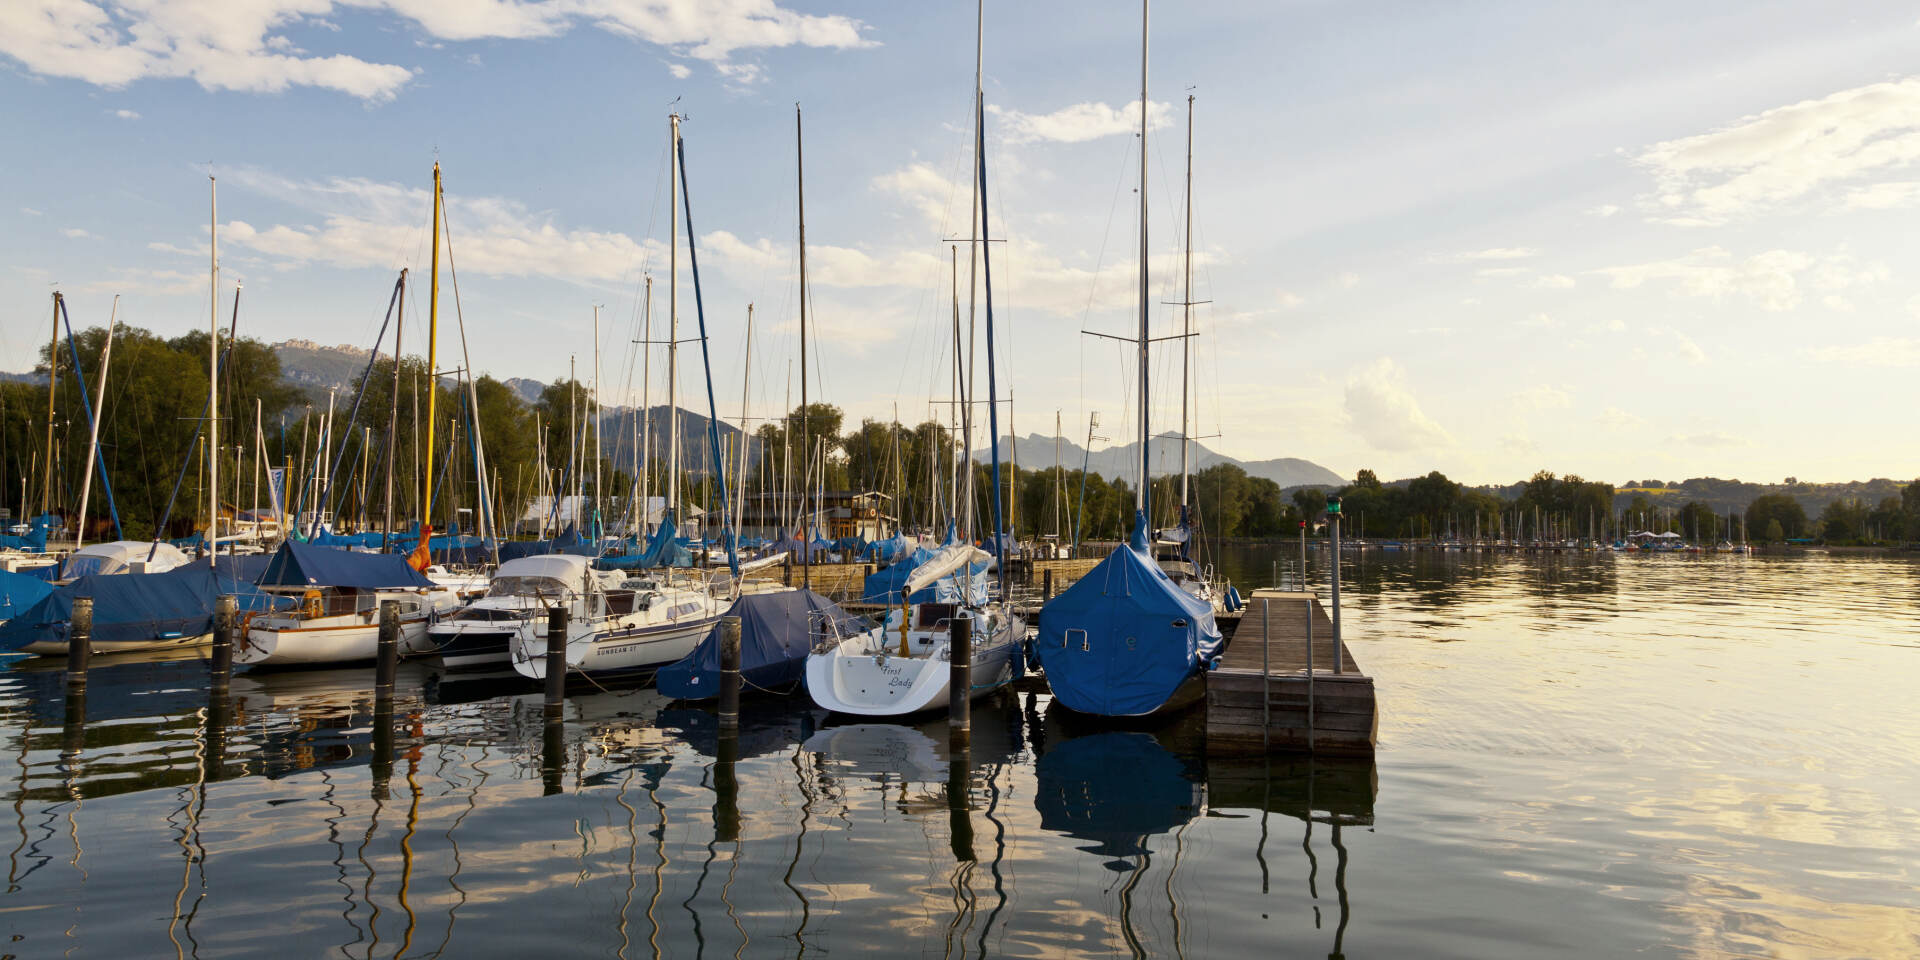 Catboats in sunset on lake Chiemsee ©Chiemsee-Alpenland Tourismus